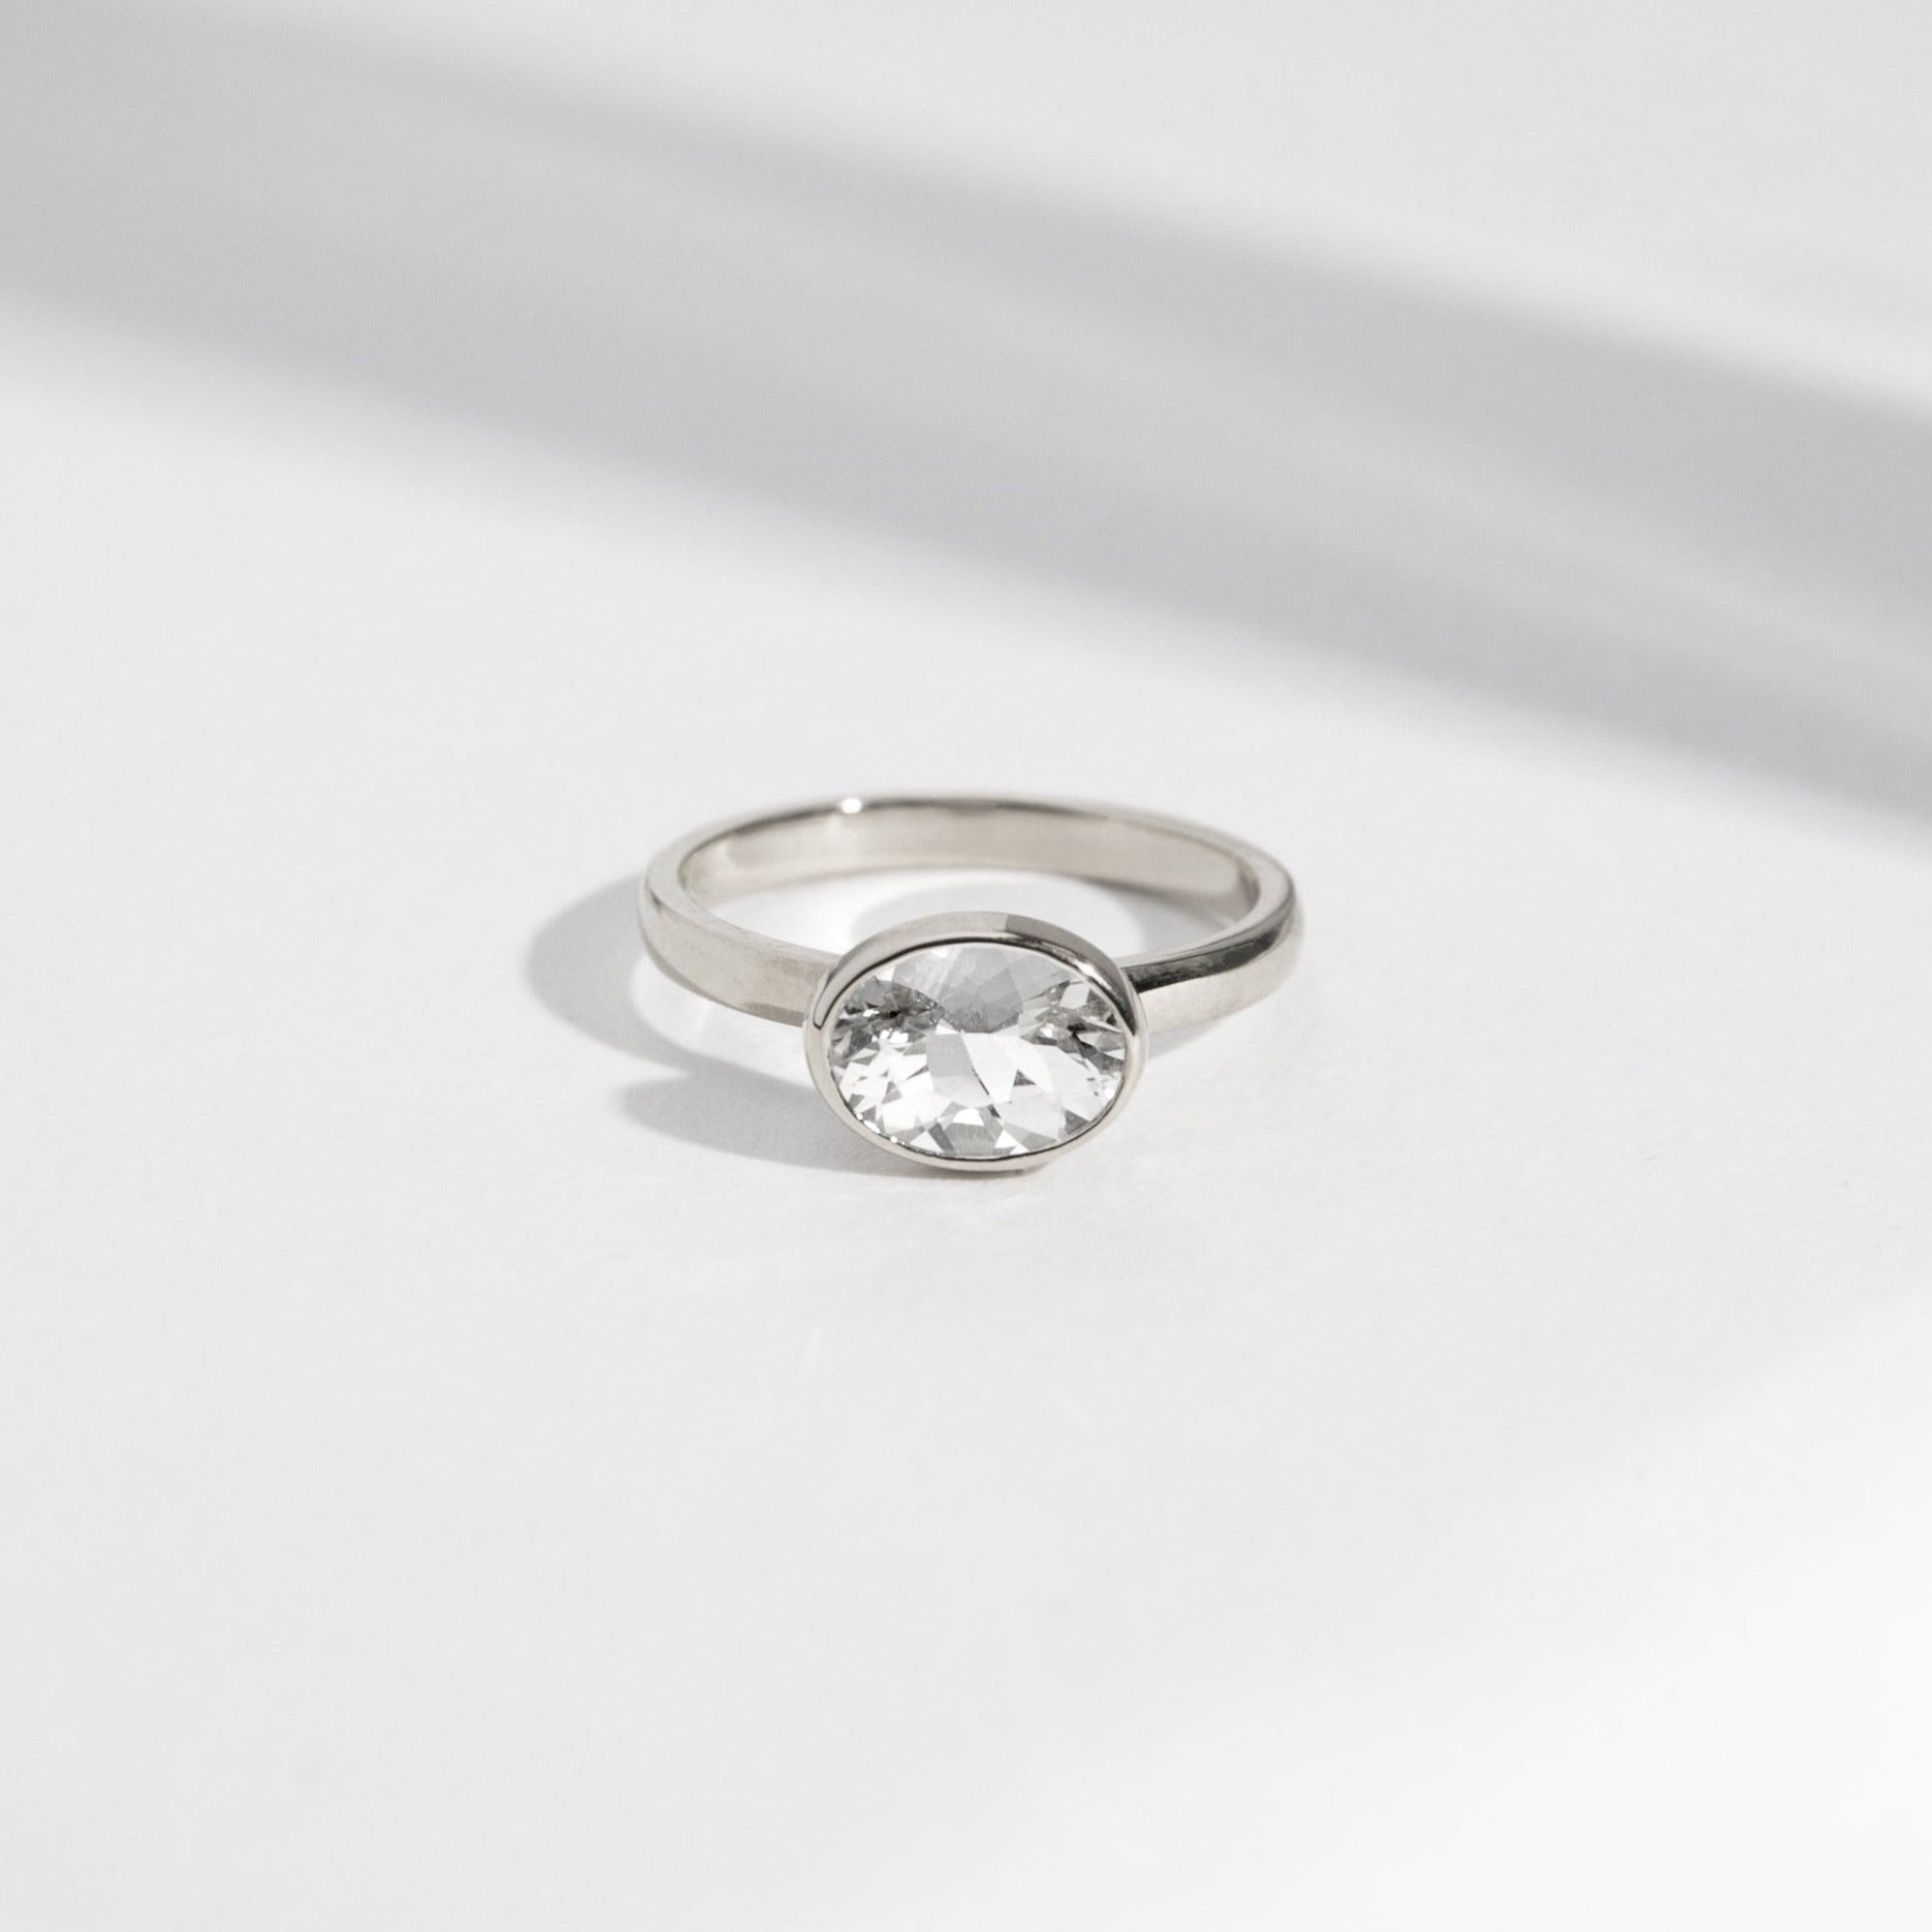 Syd Designer Ring in 14k White Gold set with an oval cut lab-grown diamond By SHW Fine Jewelry NYC